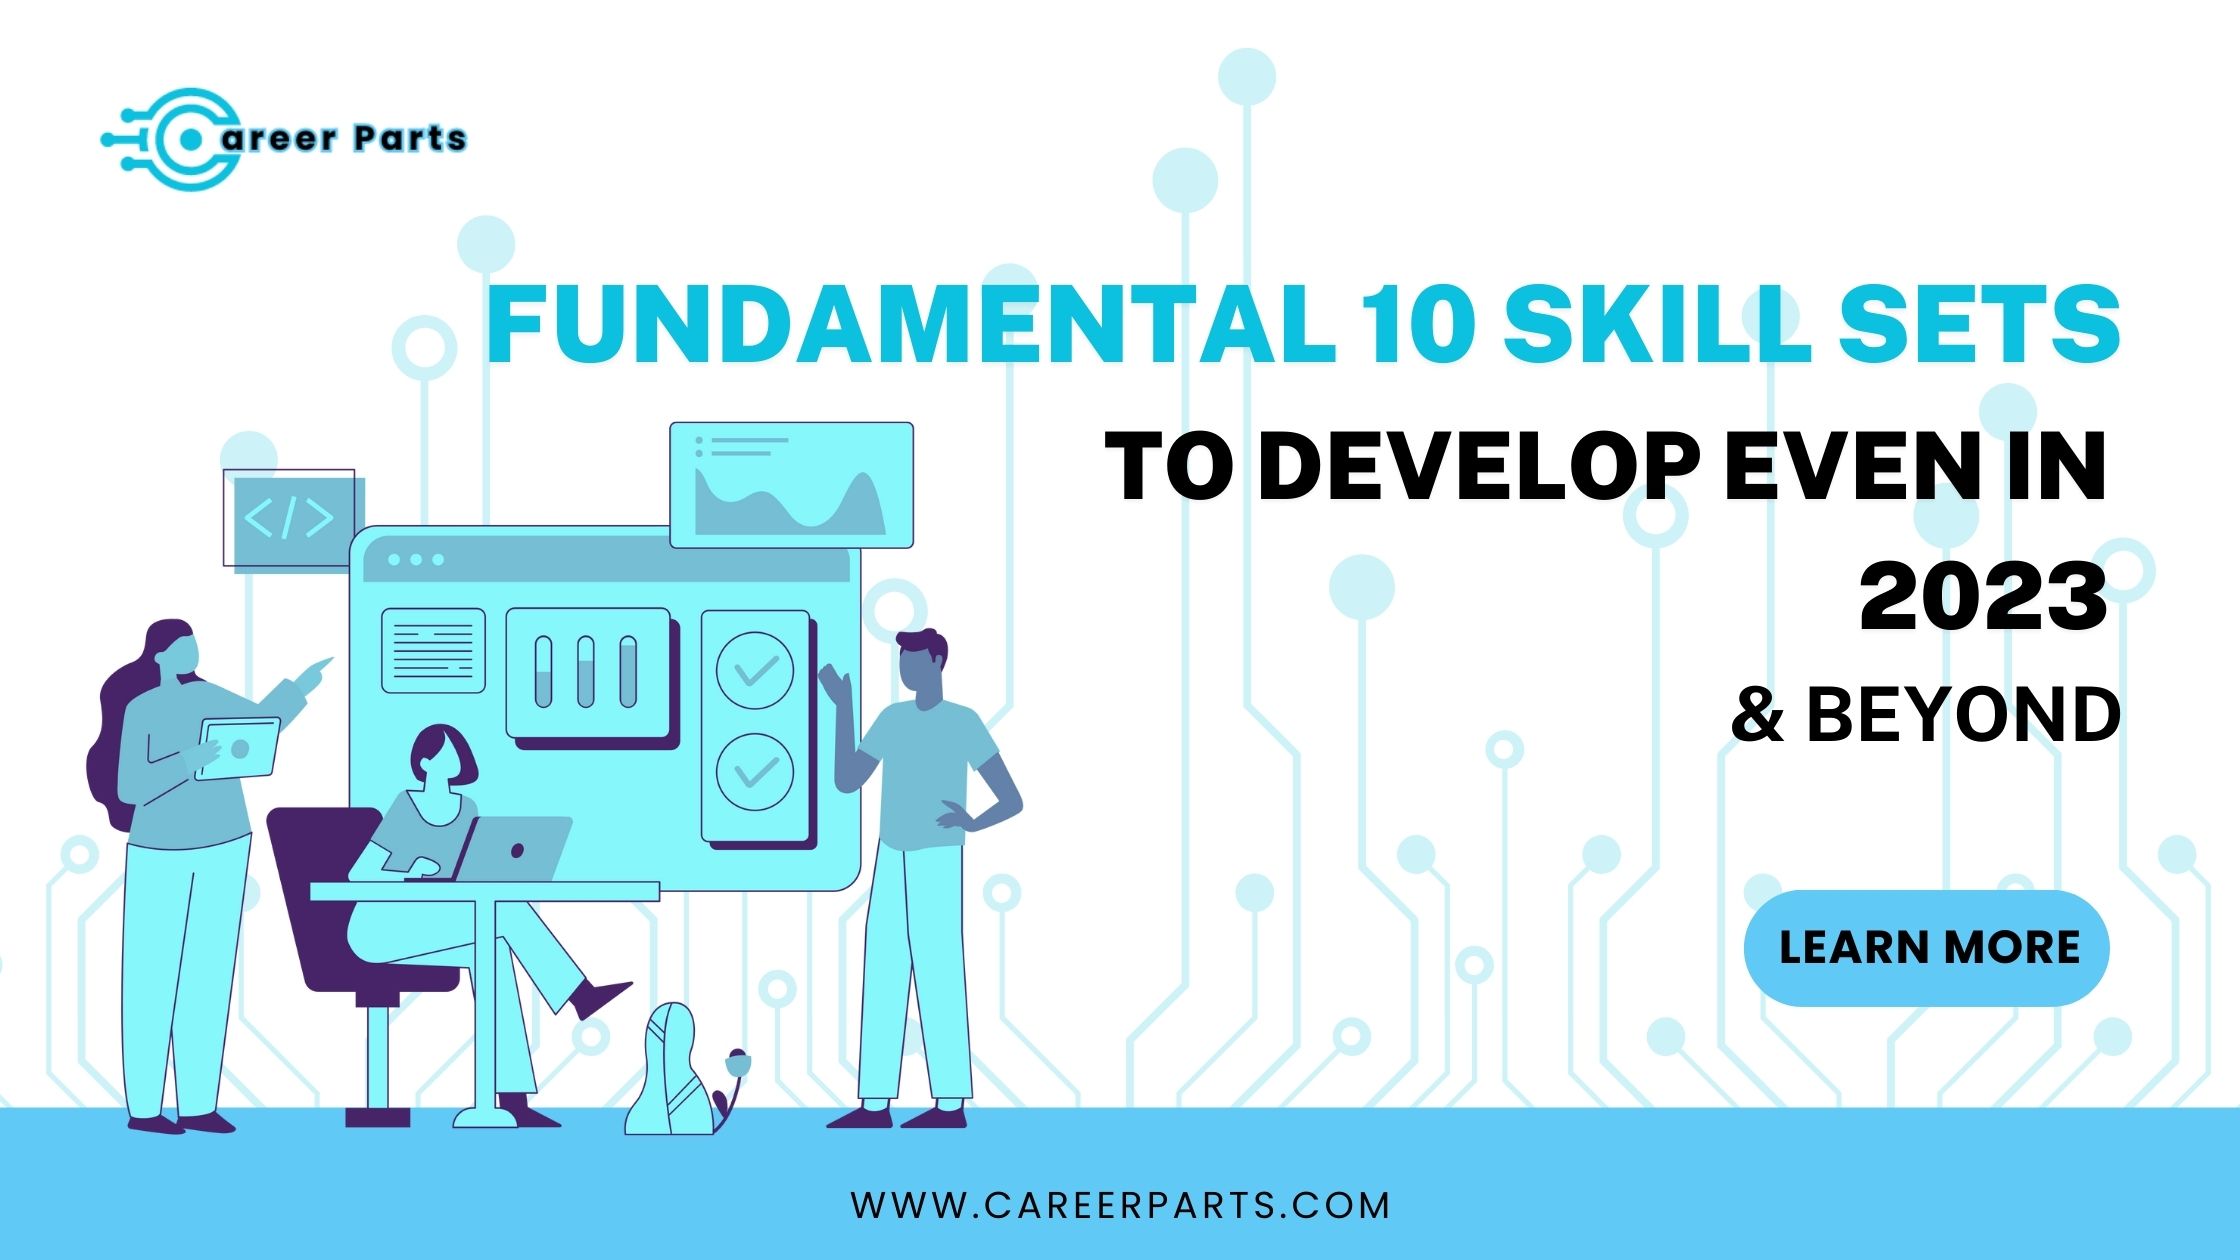 Fundamental 10 Skill Sets to Develop Even in 2023 and Beyond